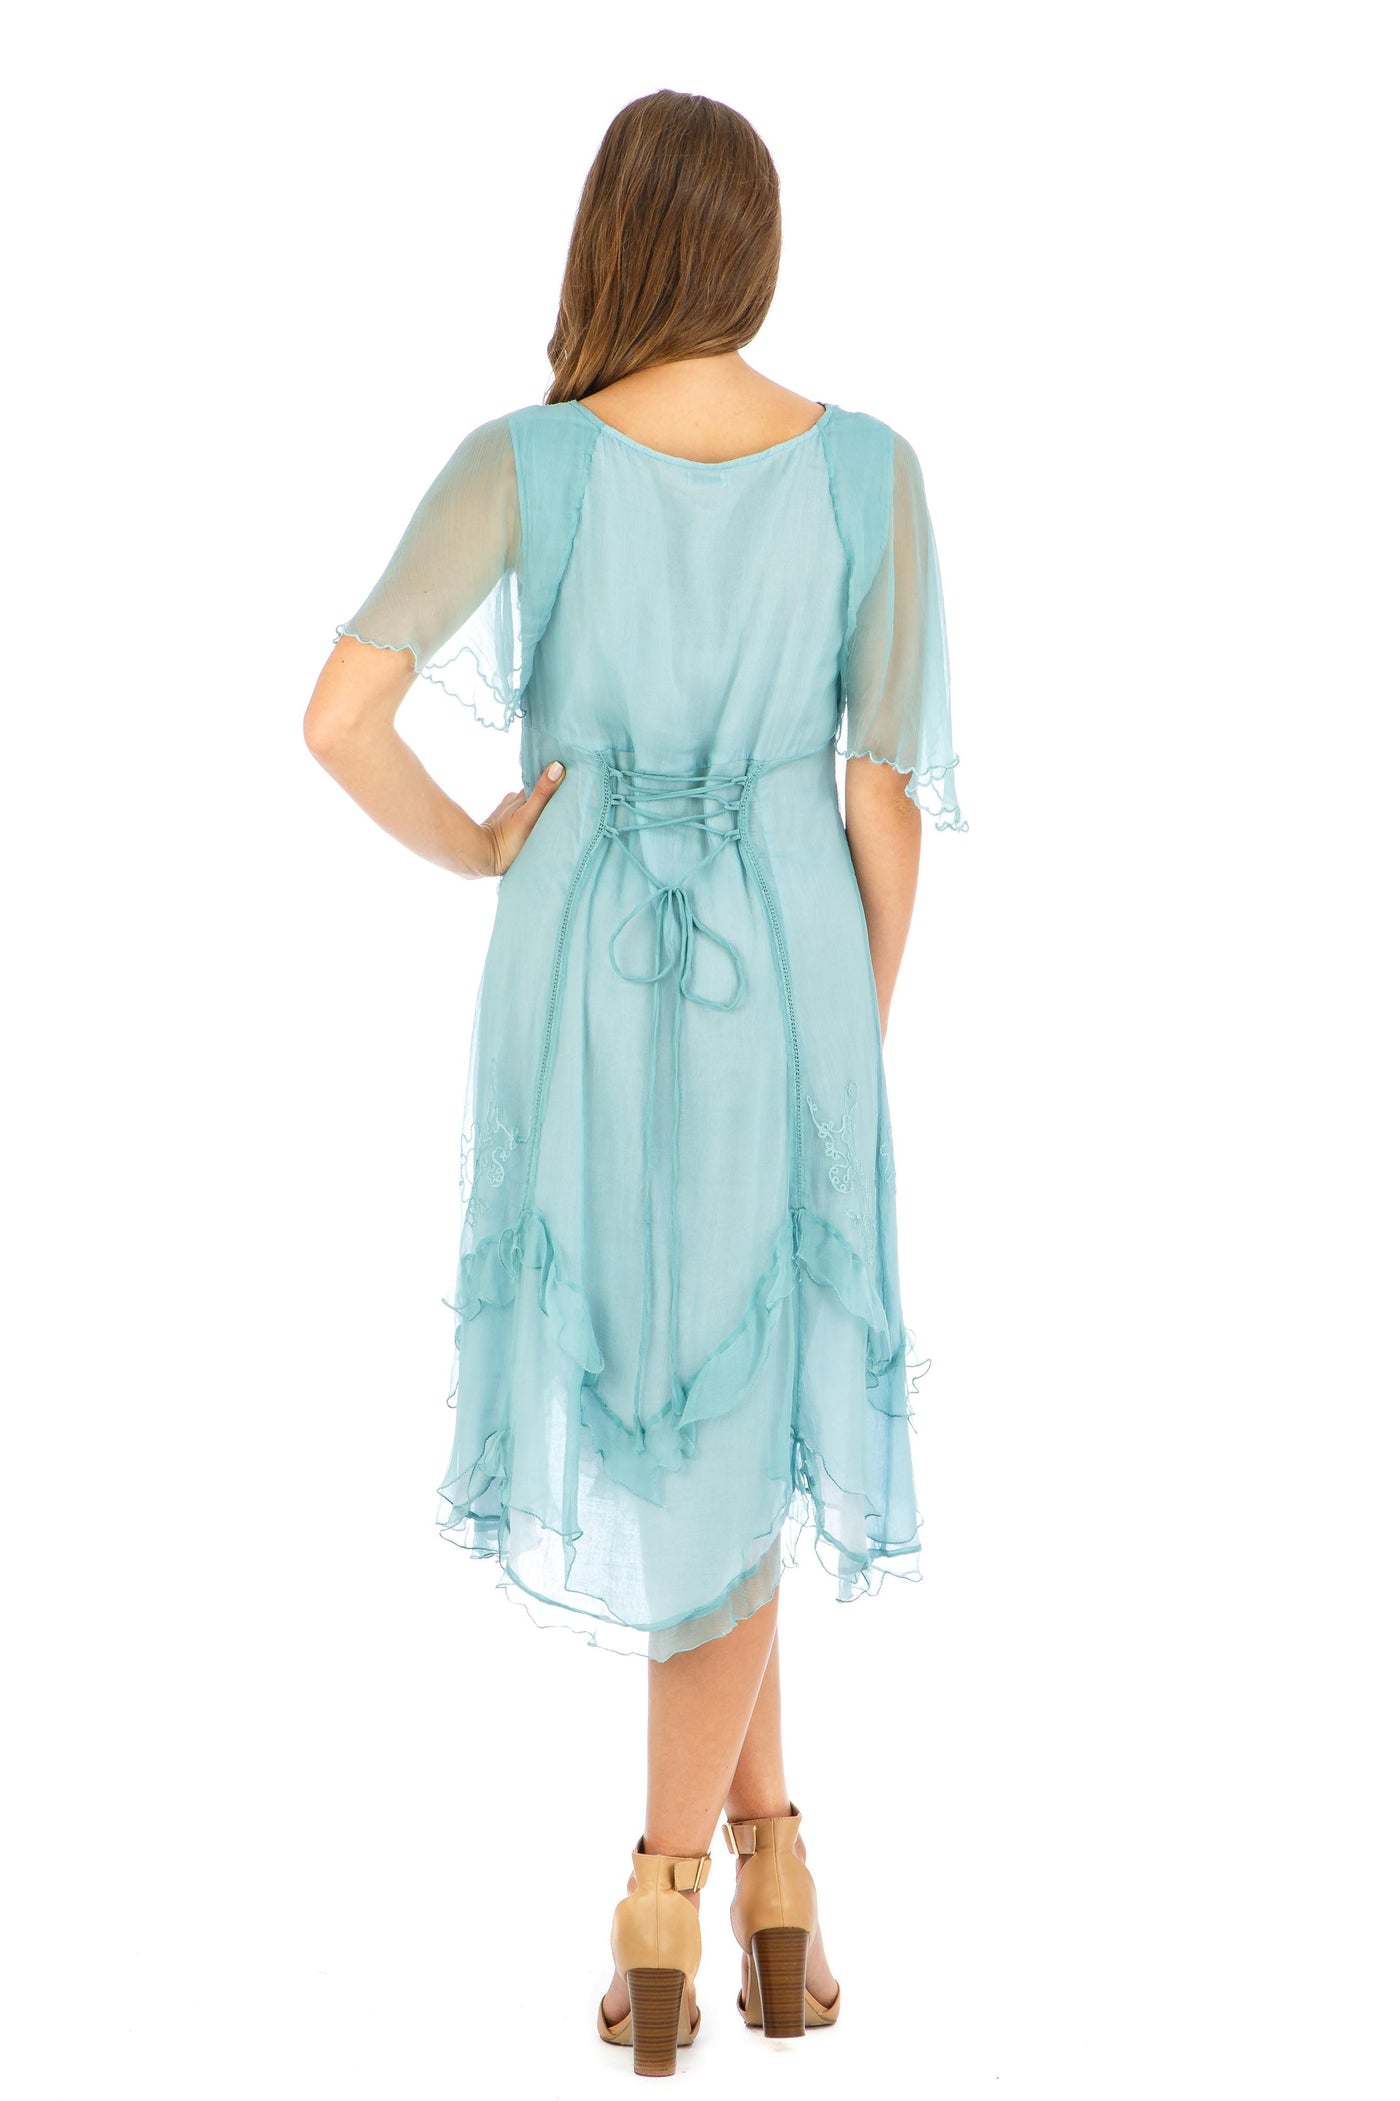 Jacqueline Vintage Style Party Dress in Turquoise by Nataya